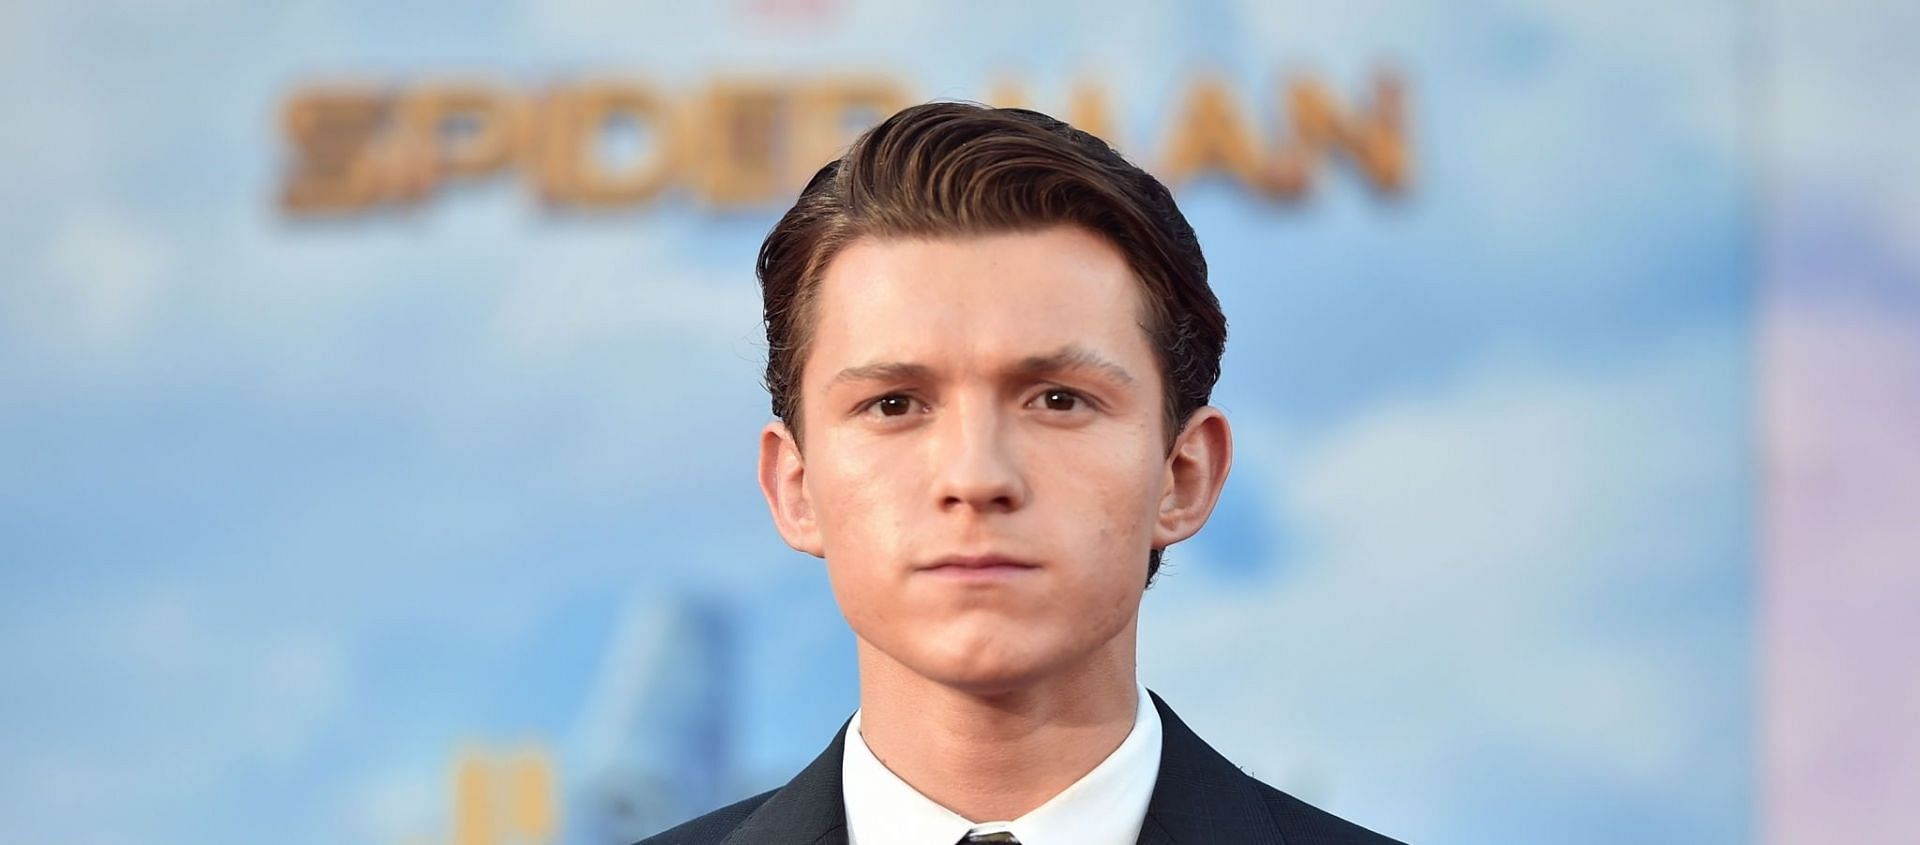 Tom Holland has reportedly been approached by The Academy to host the Oscars 2022 (Image via Alberto E. Rodriguez/Getty Images)